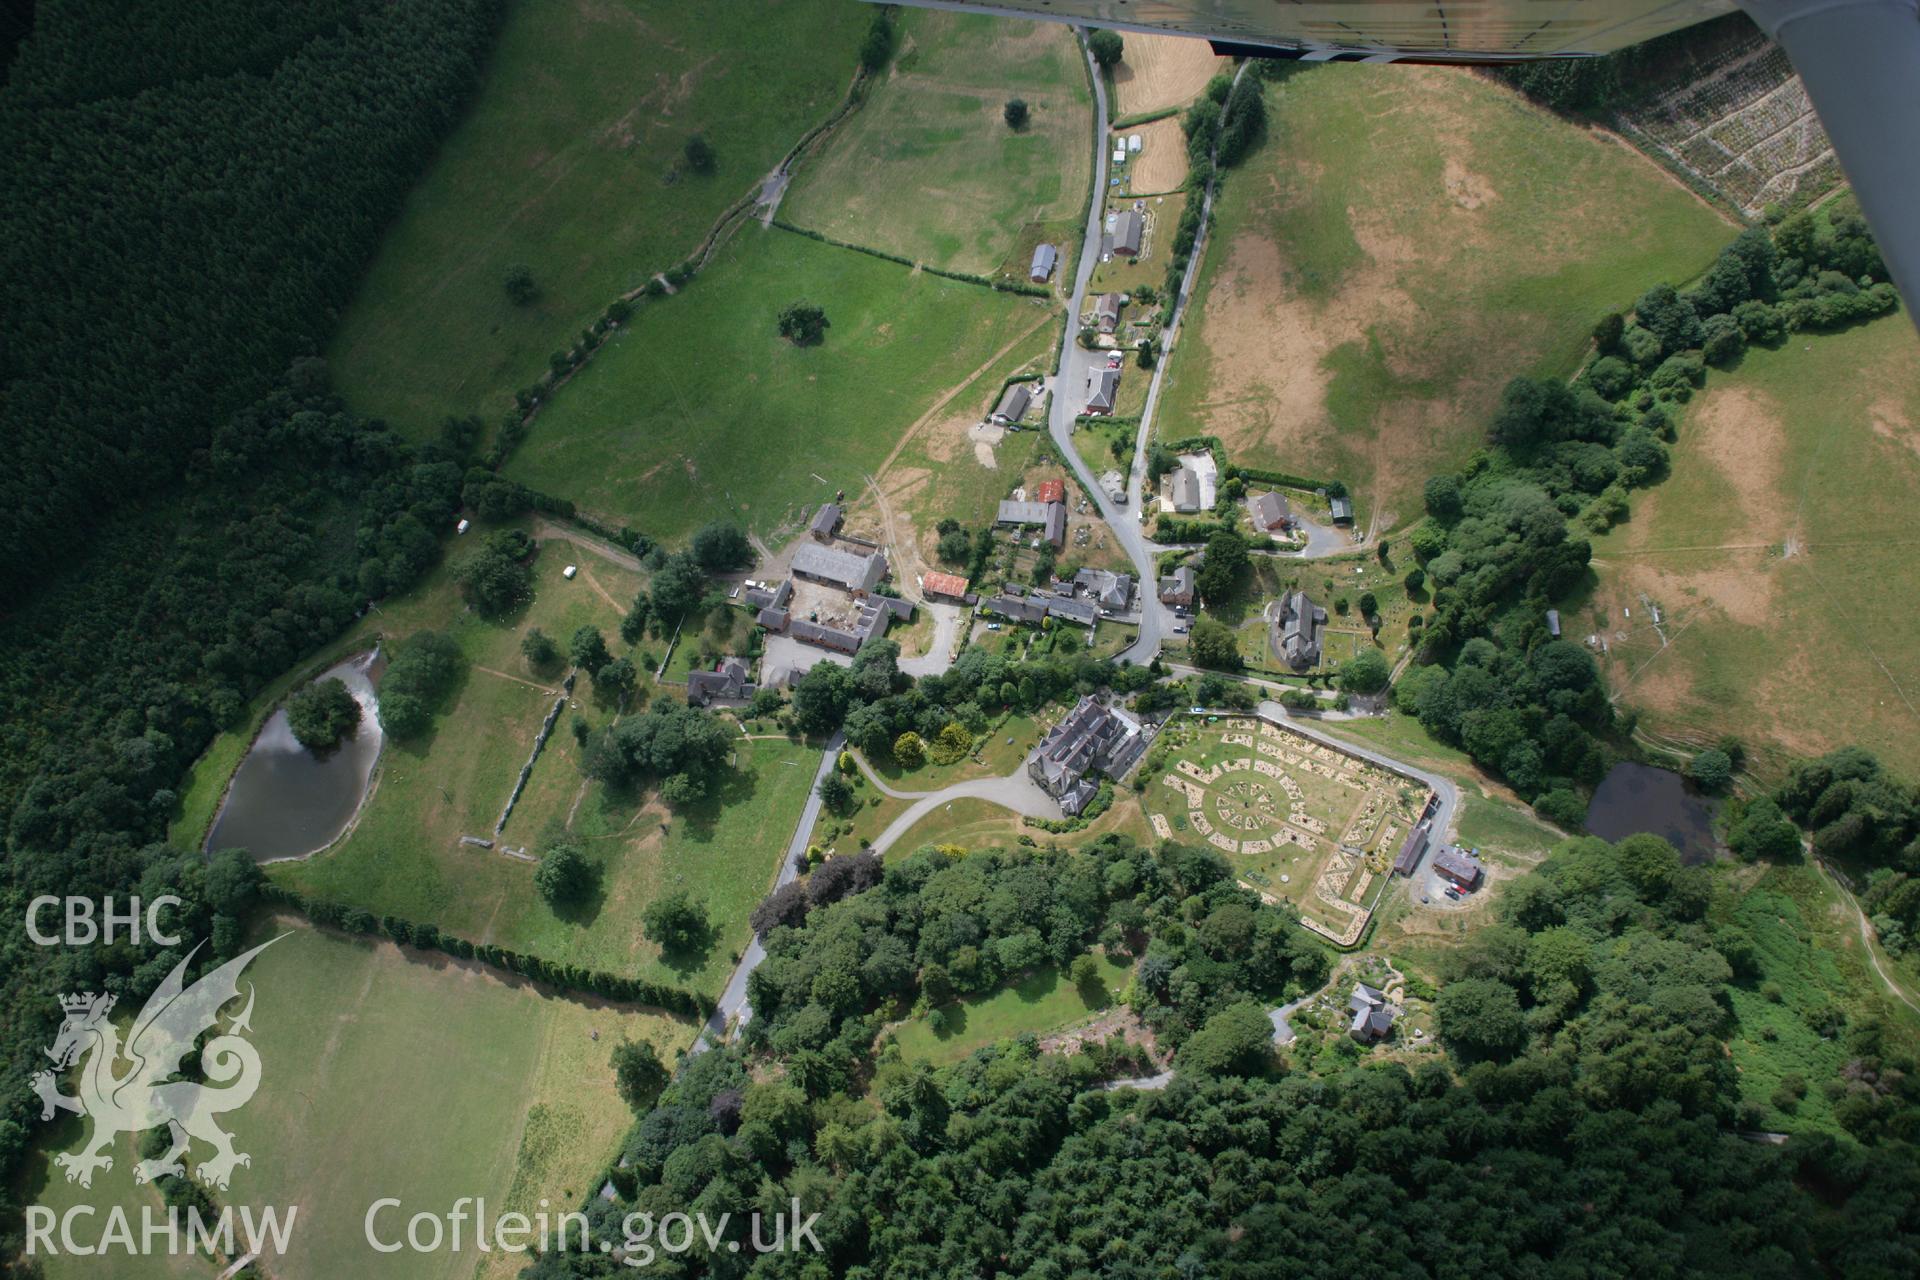 RCAHMW colour oblique aerial photograph of Abbey Cwmhir. Taken on 27 July 2006 by Toby Driver.